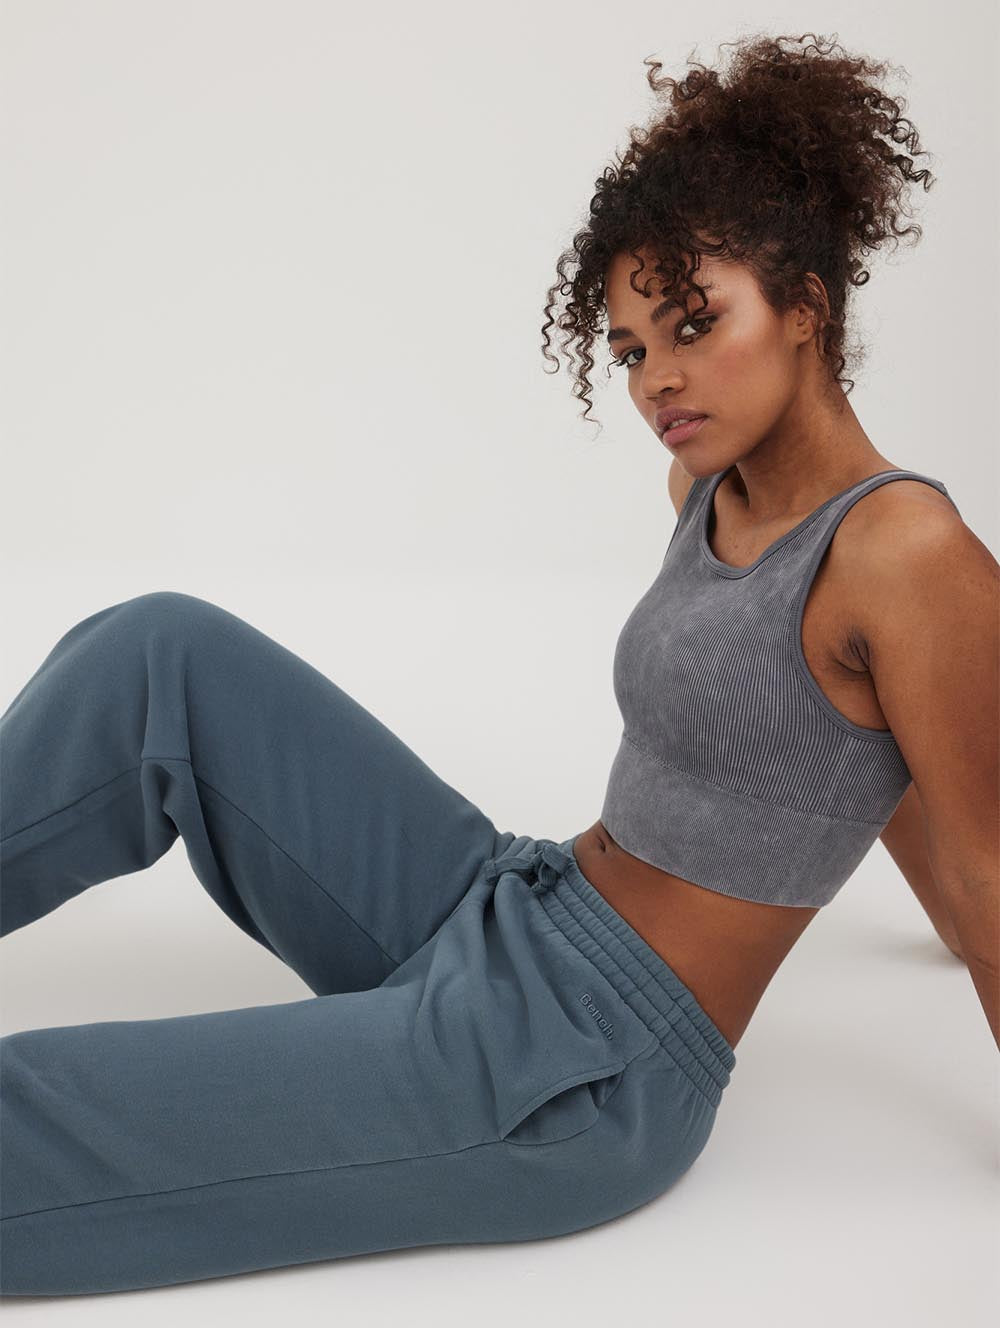  Bra And Jogger Set For Women Yoga Workout Sport